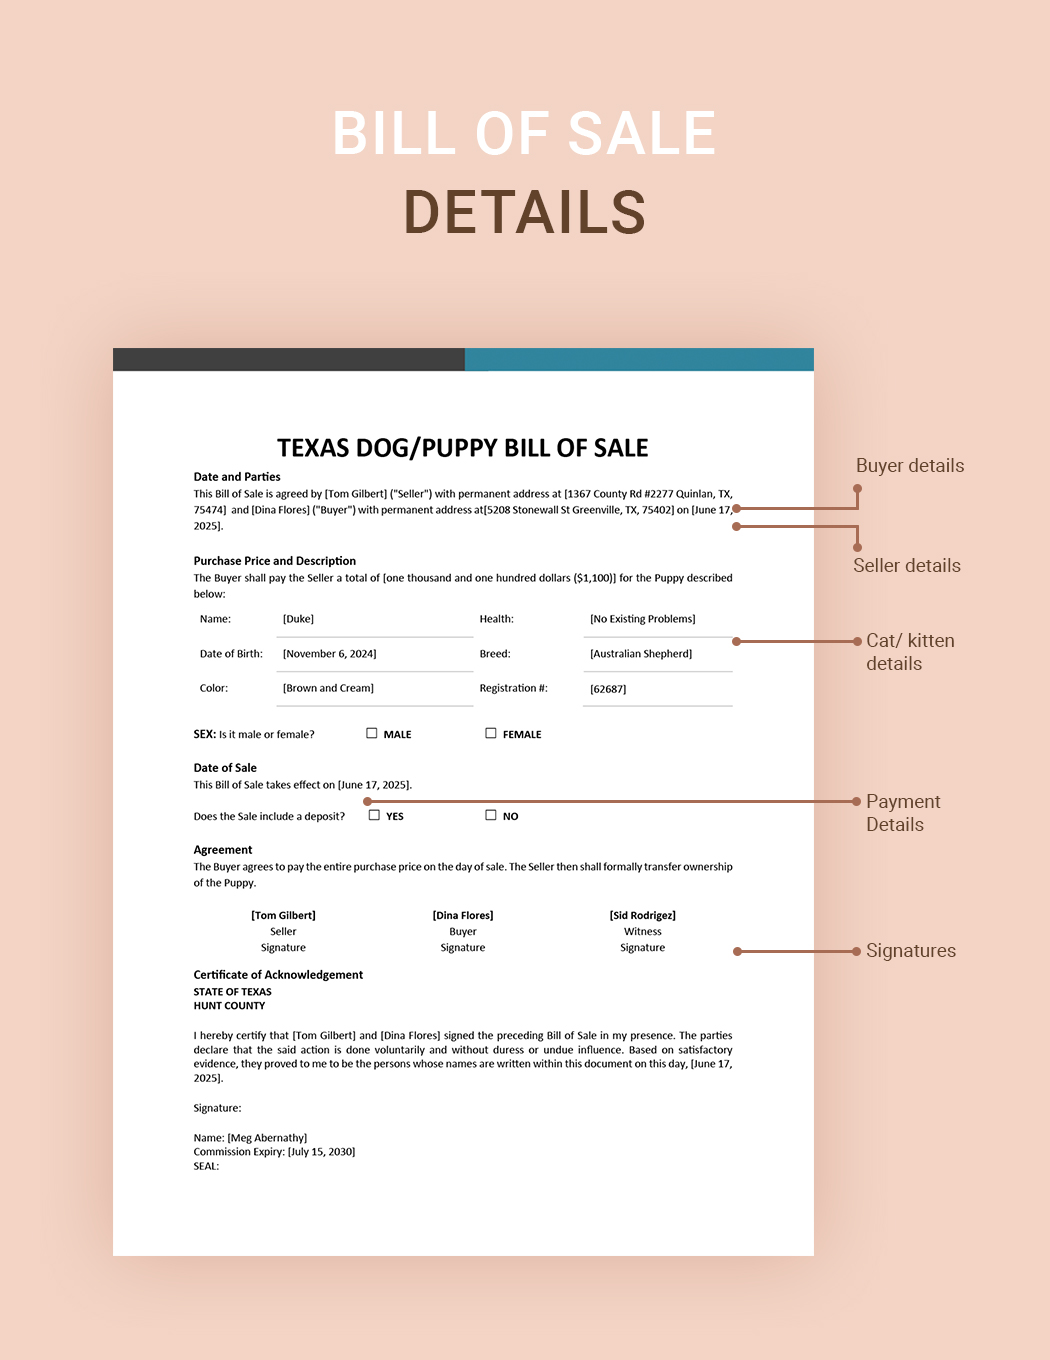 Texas Dog / Puppy Bill of Sale Template